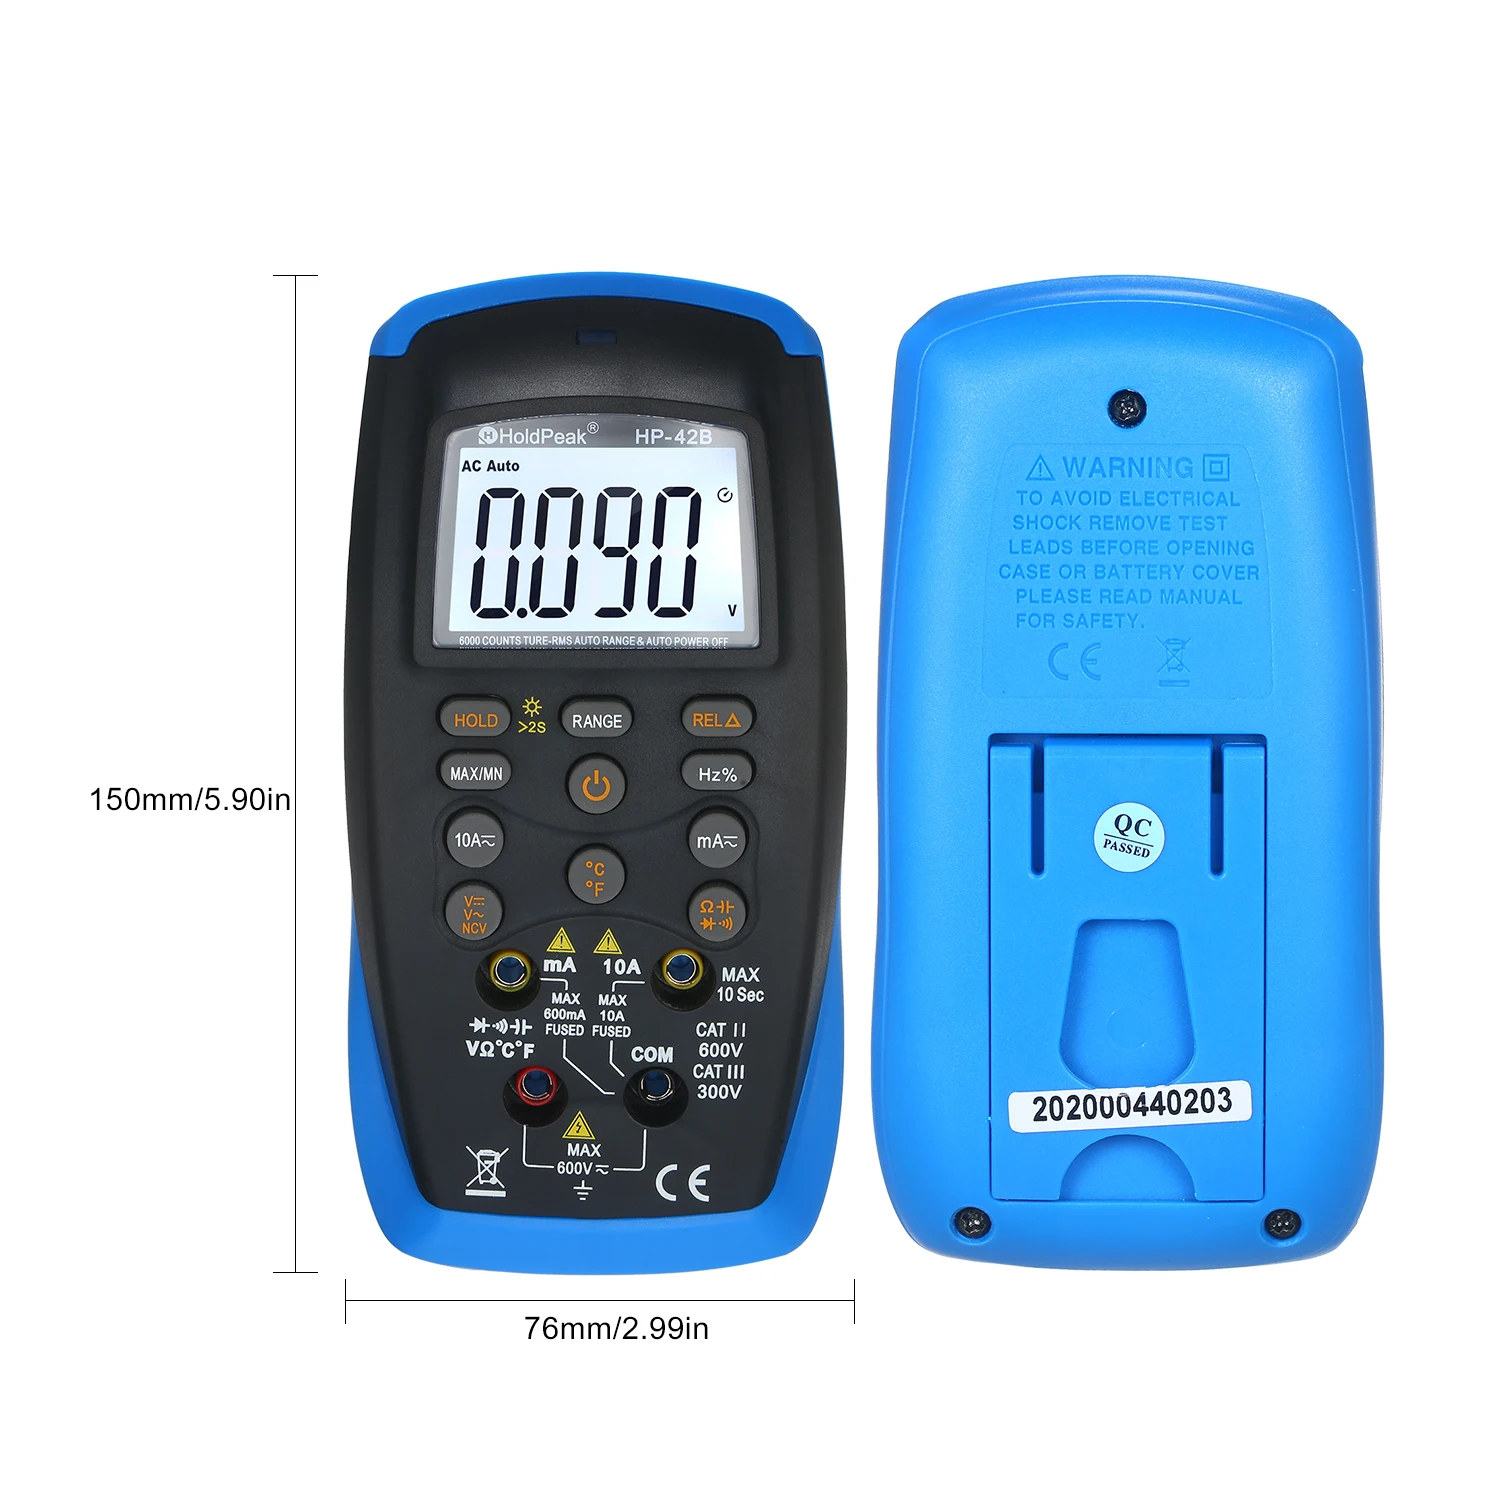 

Holdpeak LCD Digital Multimeter TRMS Manual and Auto Ranging AC/DC Amp Volt Ohm Diode Frequency Capacitance Continuity Voltmeter